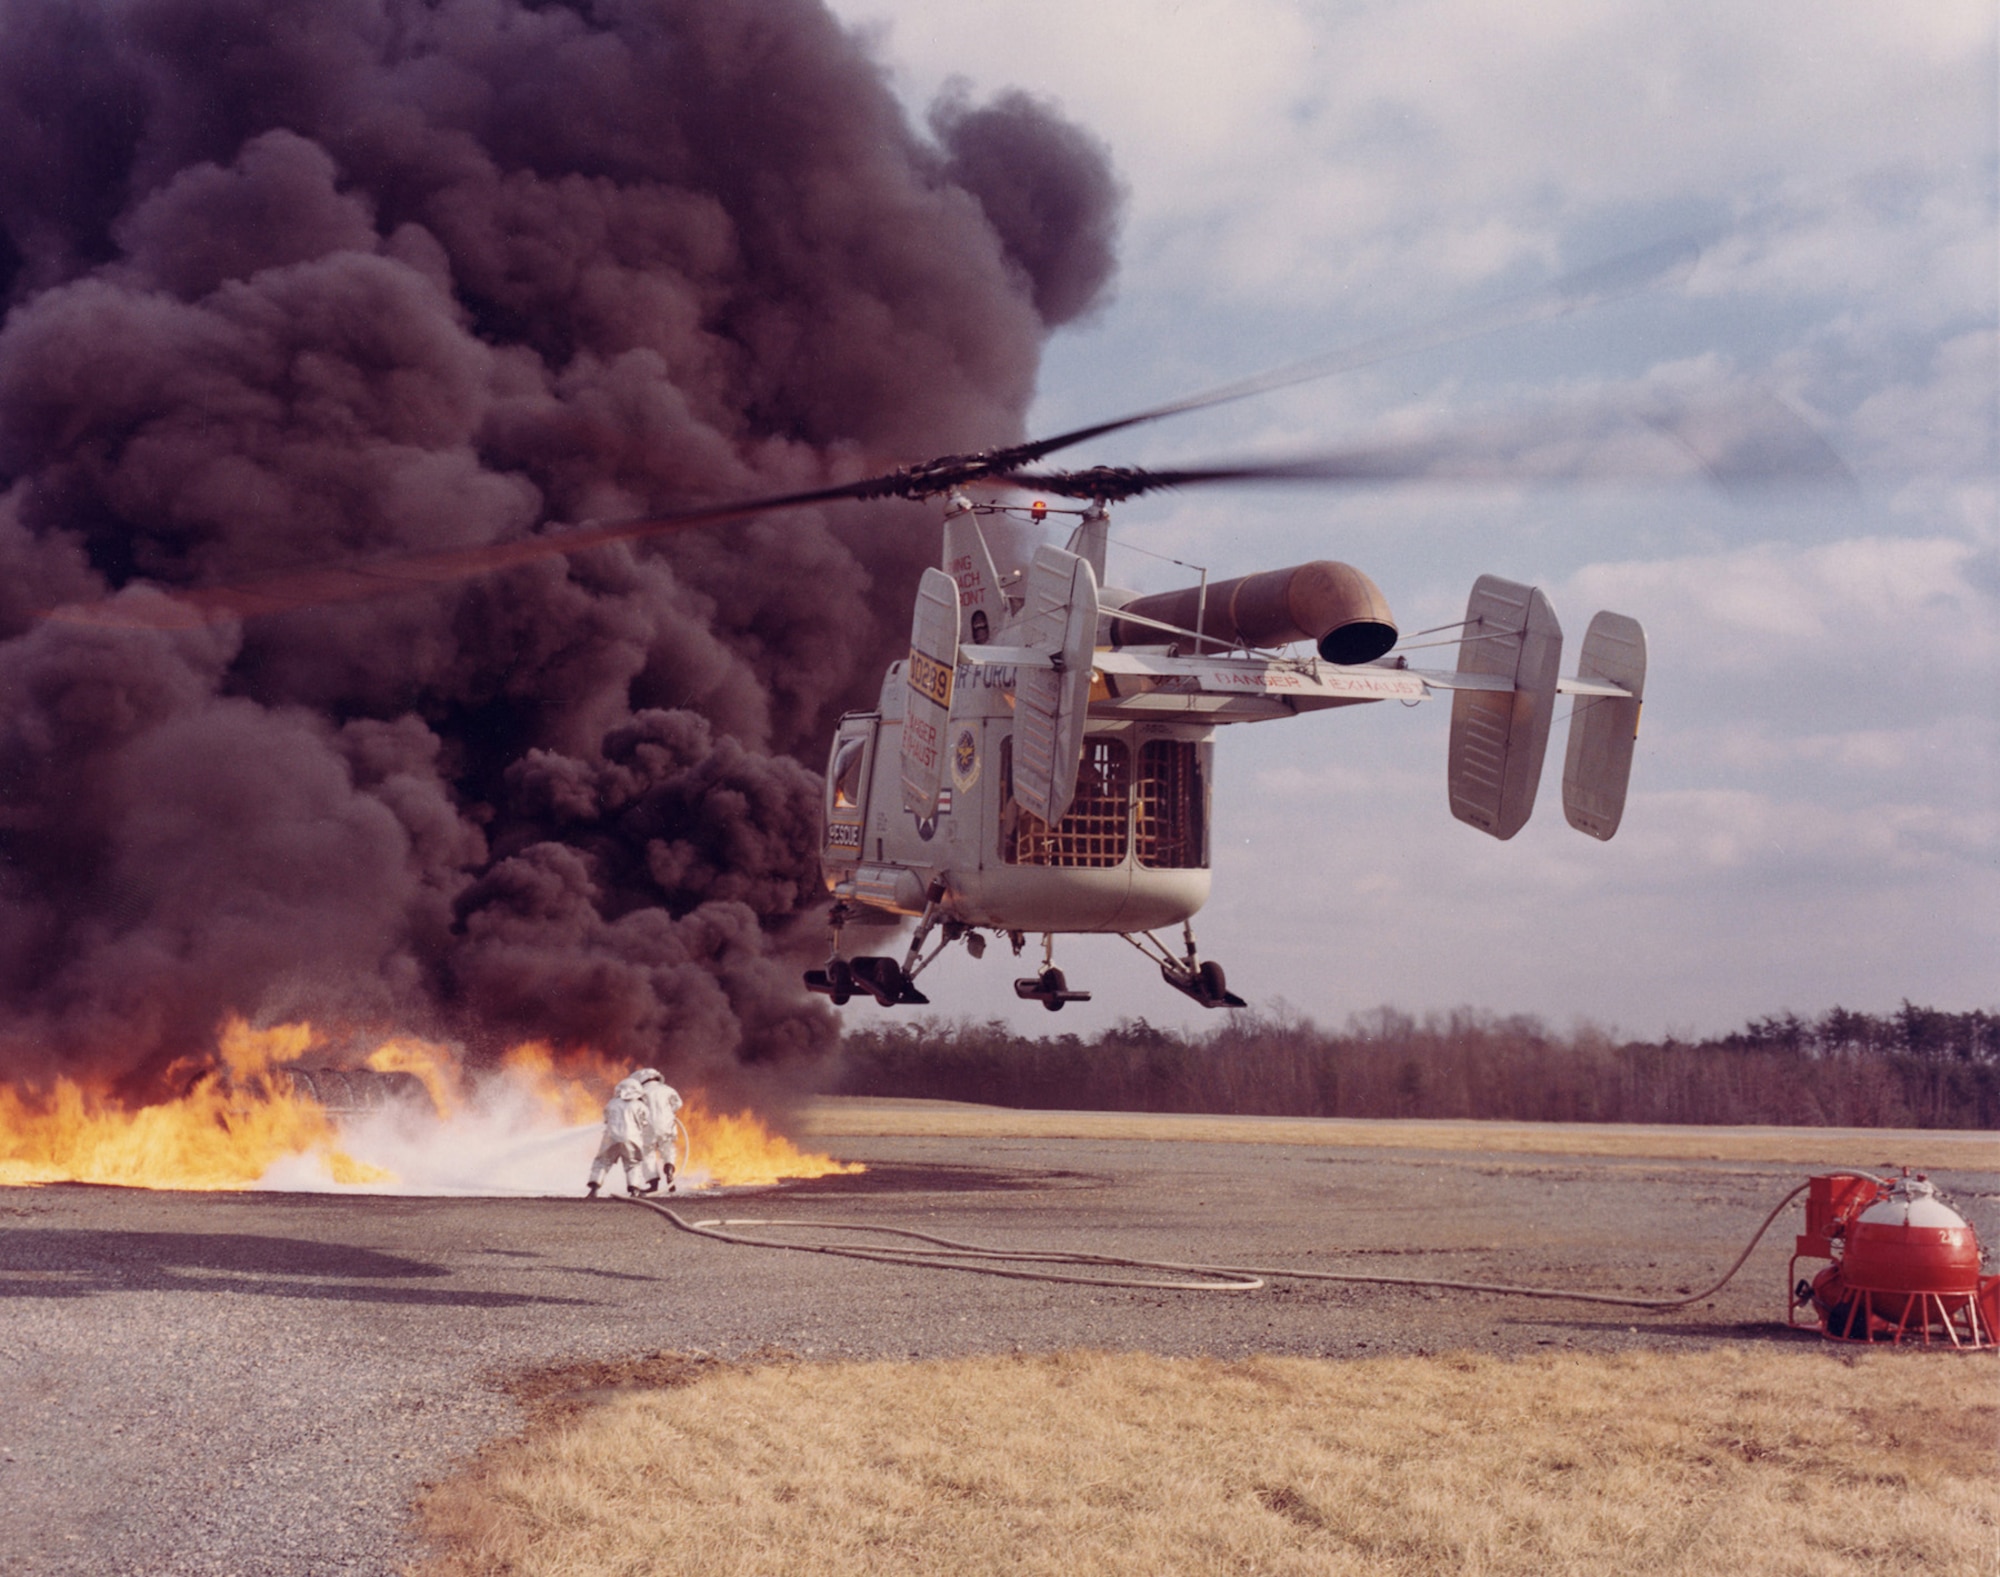 HH-43 crew practicing Local Base Rescue/Firefighting. Downwash air from the rotors opened a path for rescuers to spray foam from the red and white fire suppression kit in the lower right. (U.S. Air Force photo)